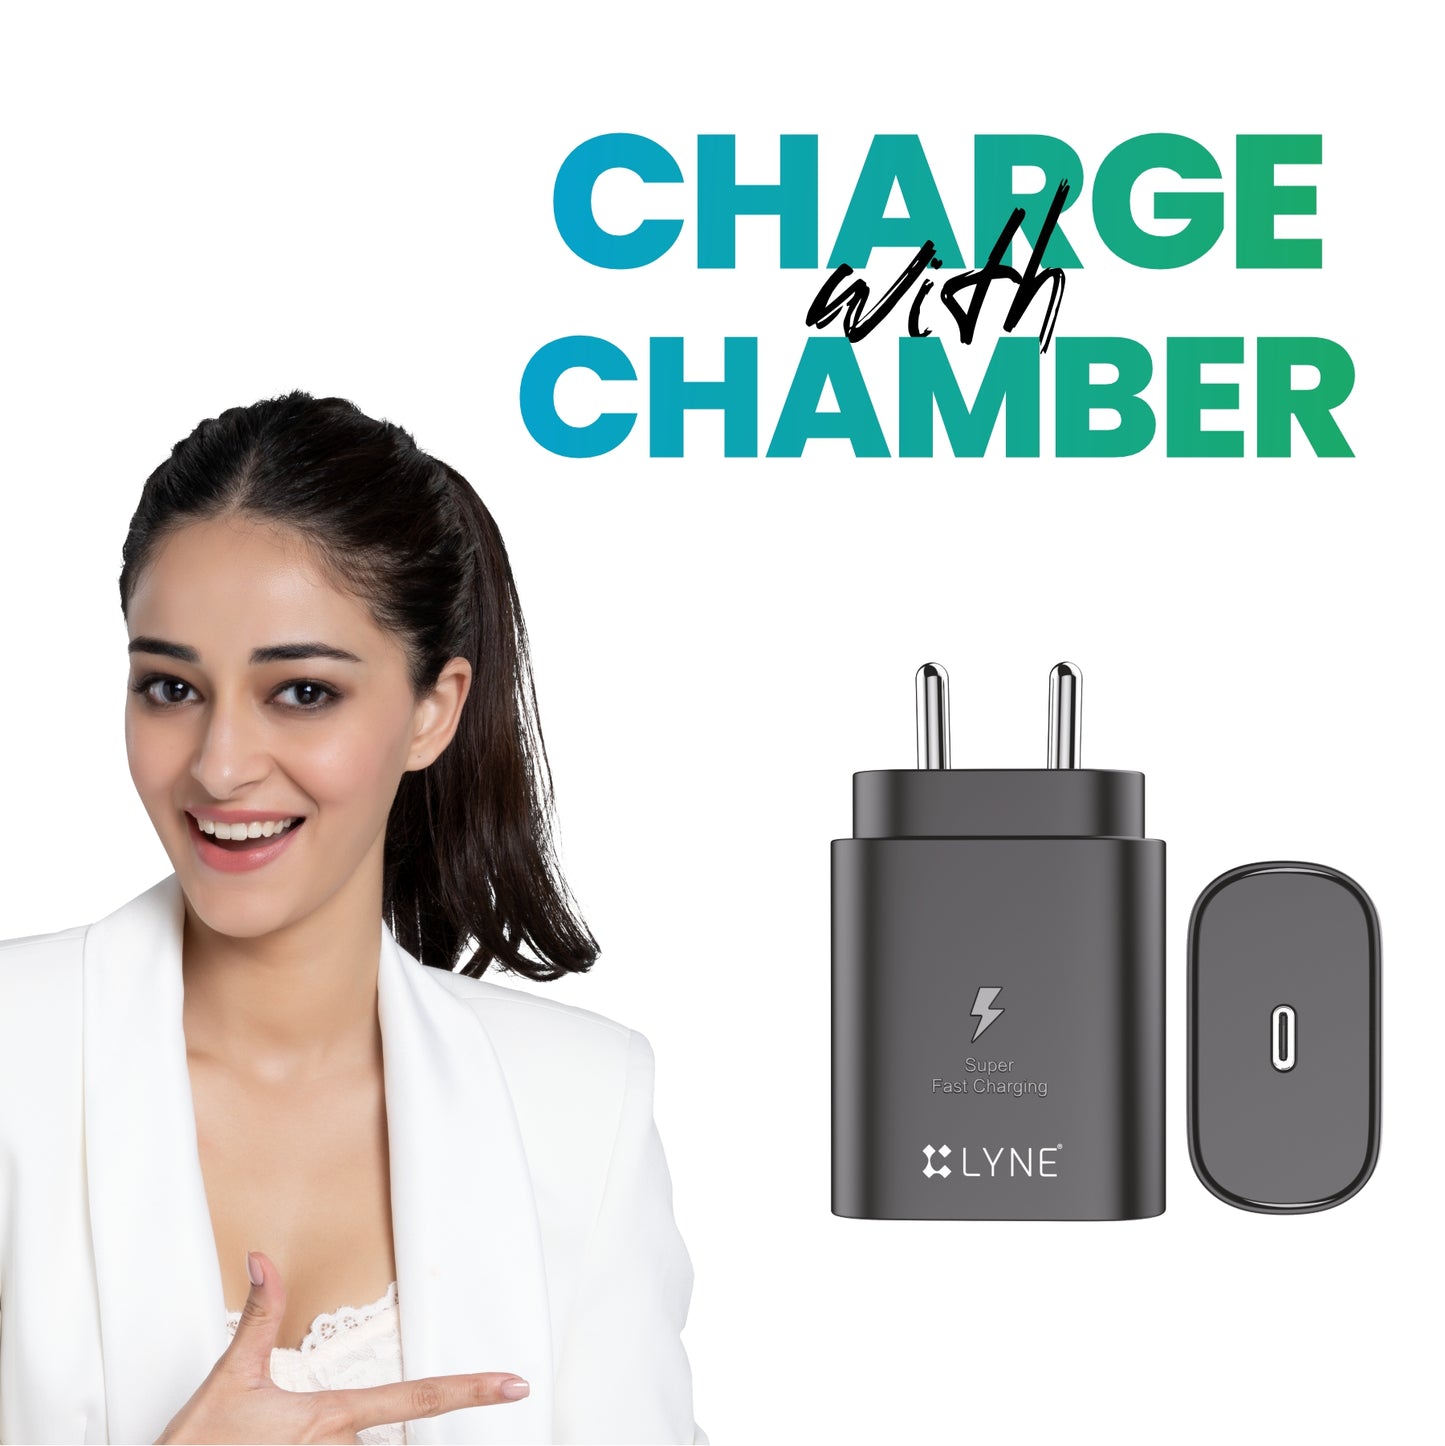 LYNE Chamber 22c 25W Output with Type-C cable, Super Fast Charging